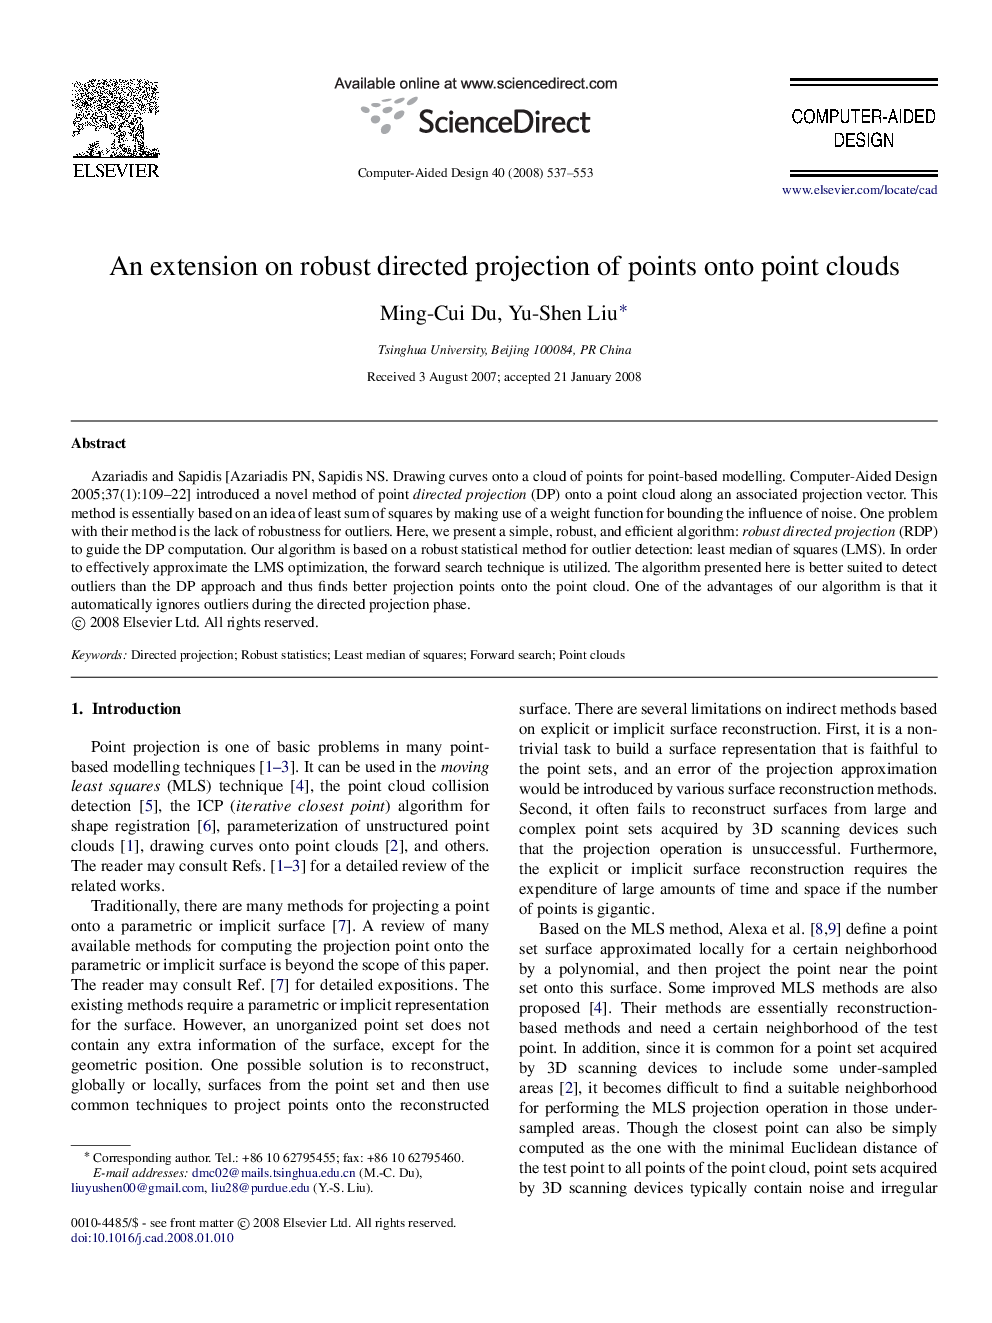 An extension on robust directed projection of points onto point clouds